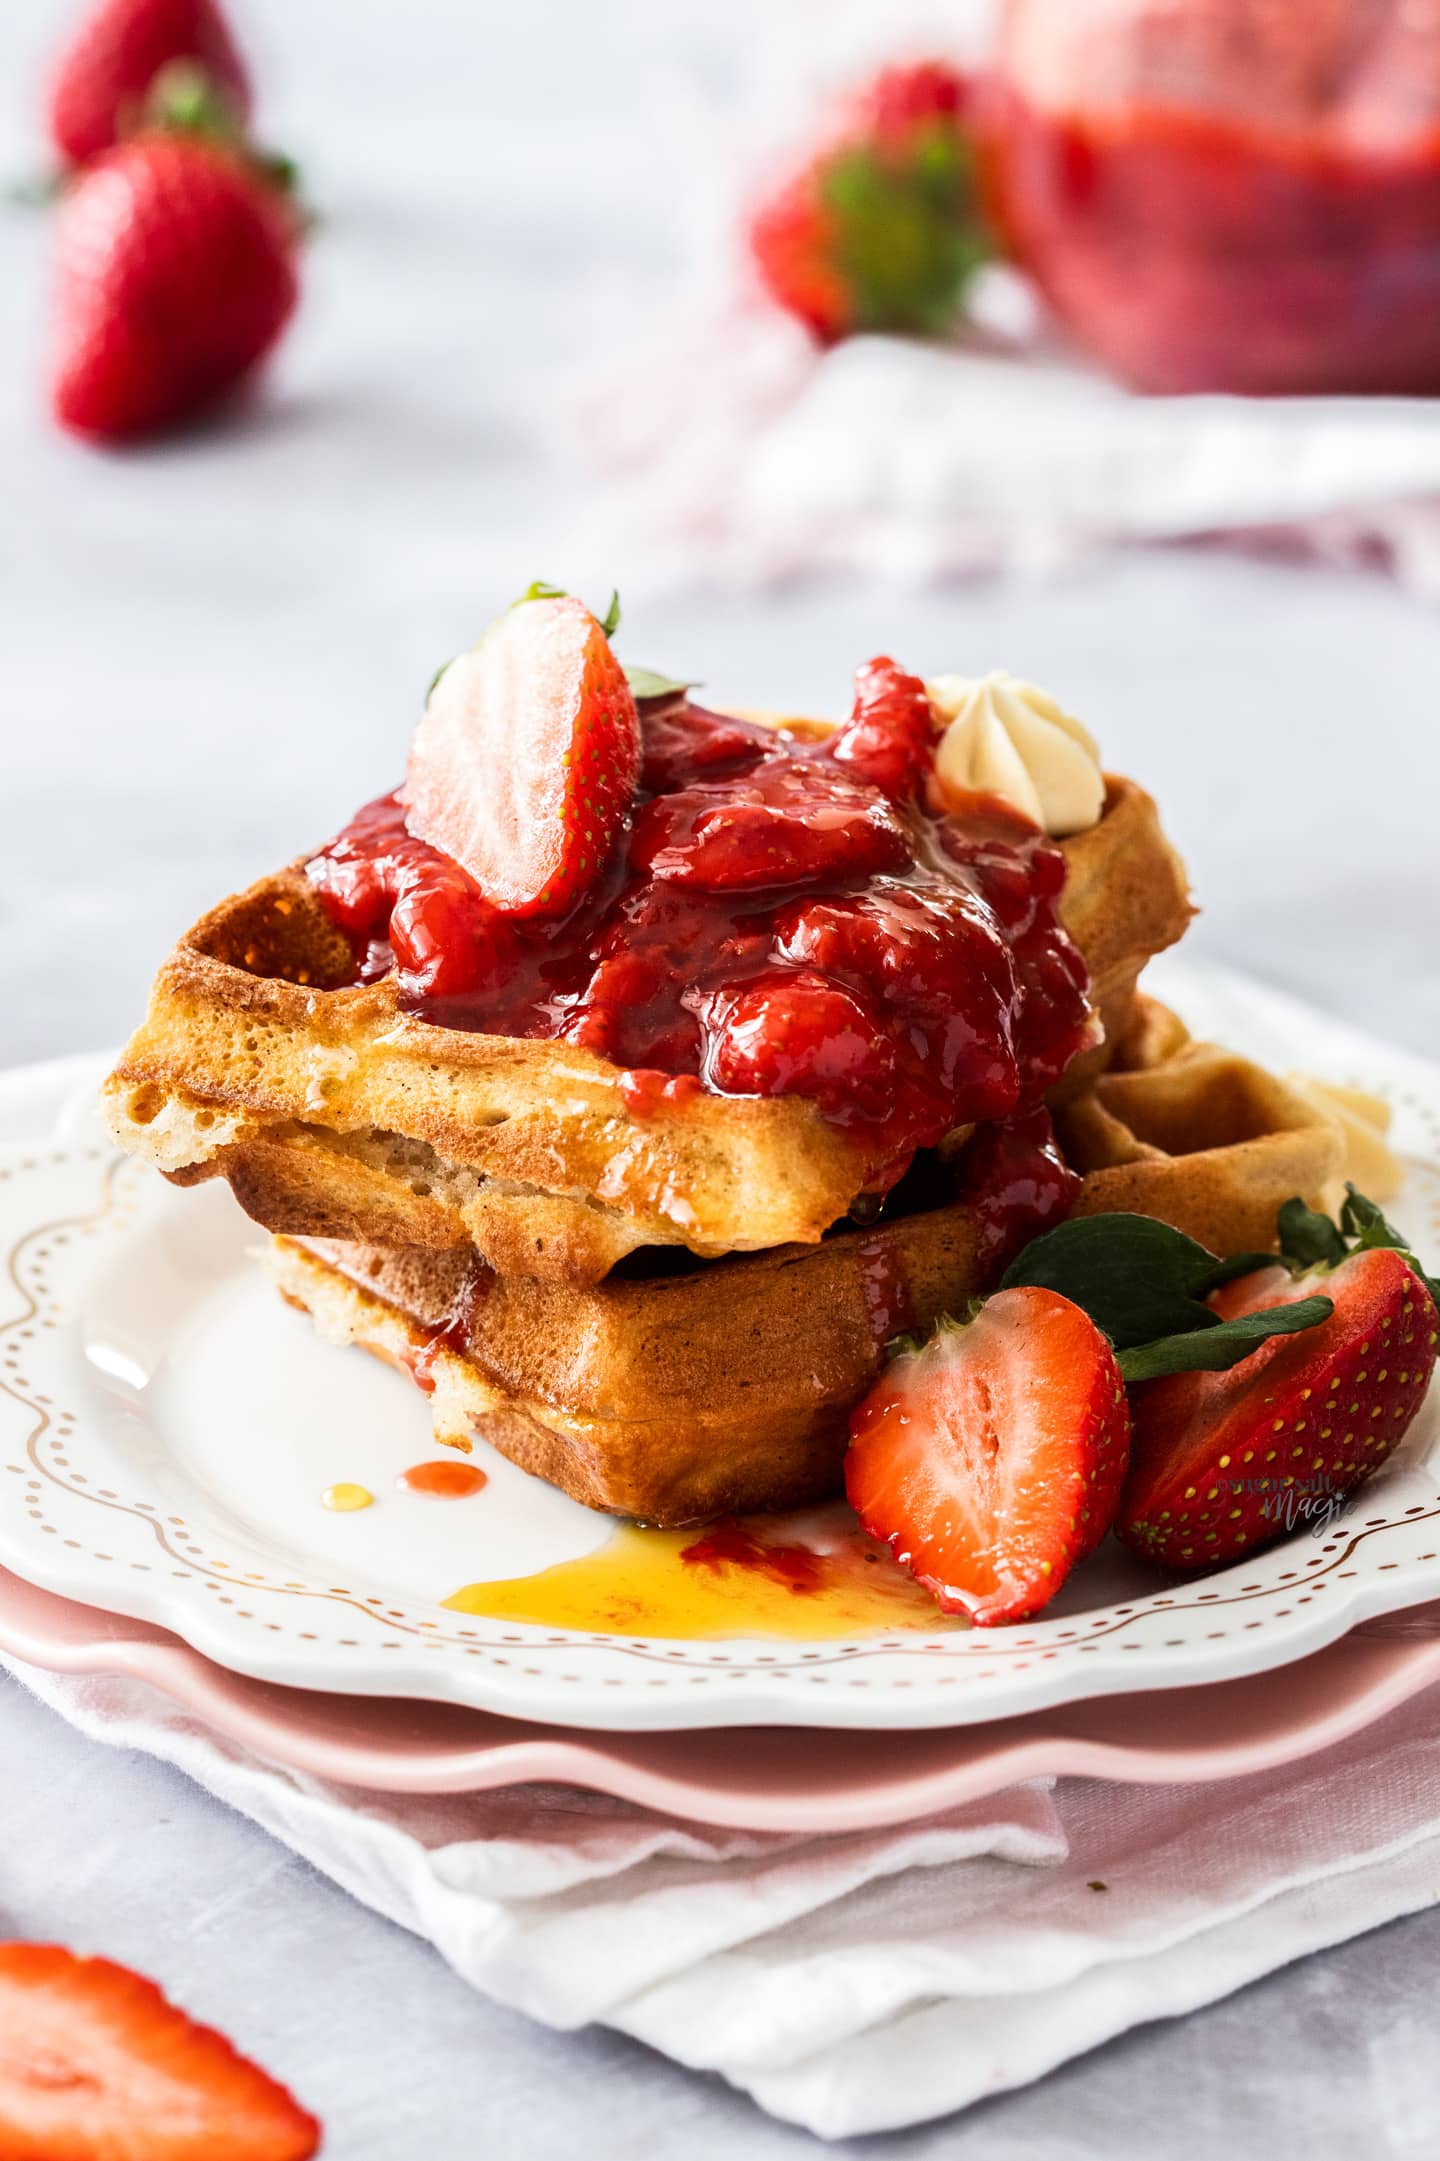 Strawberry topping on two waffles on a dessert plate.